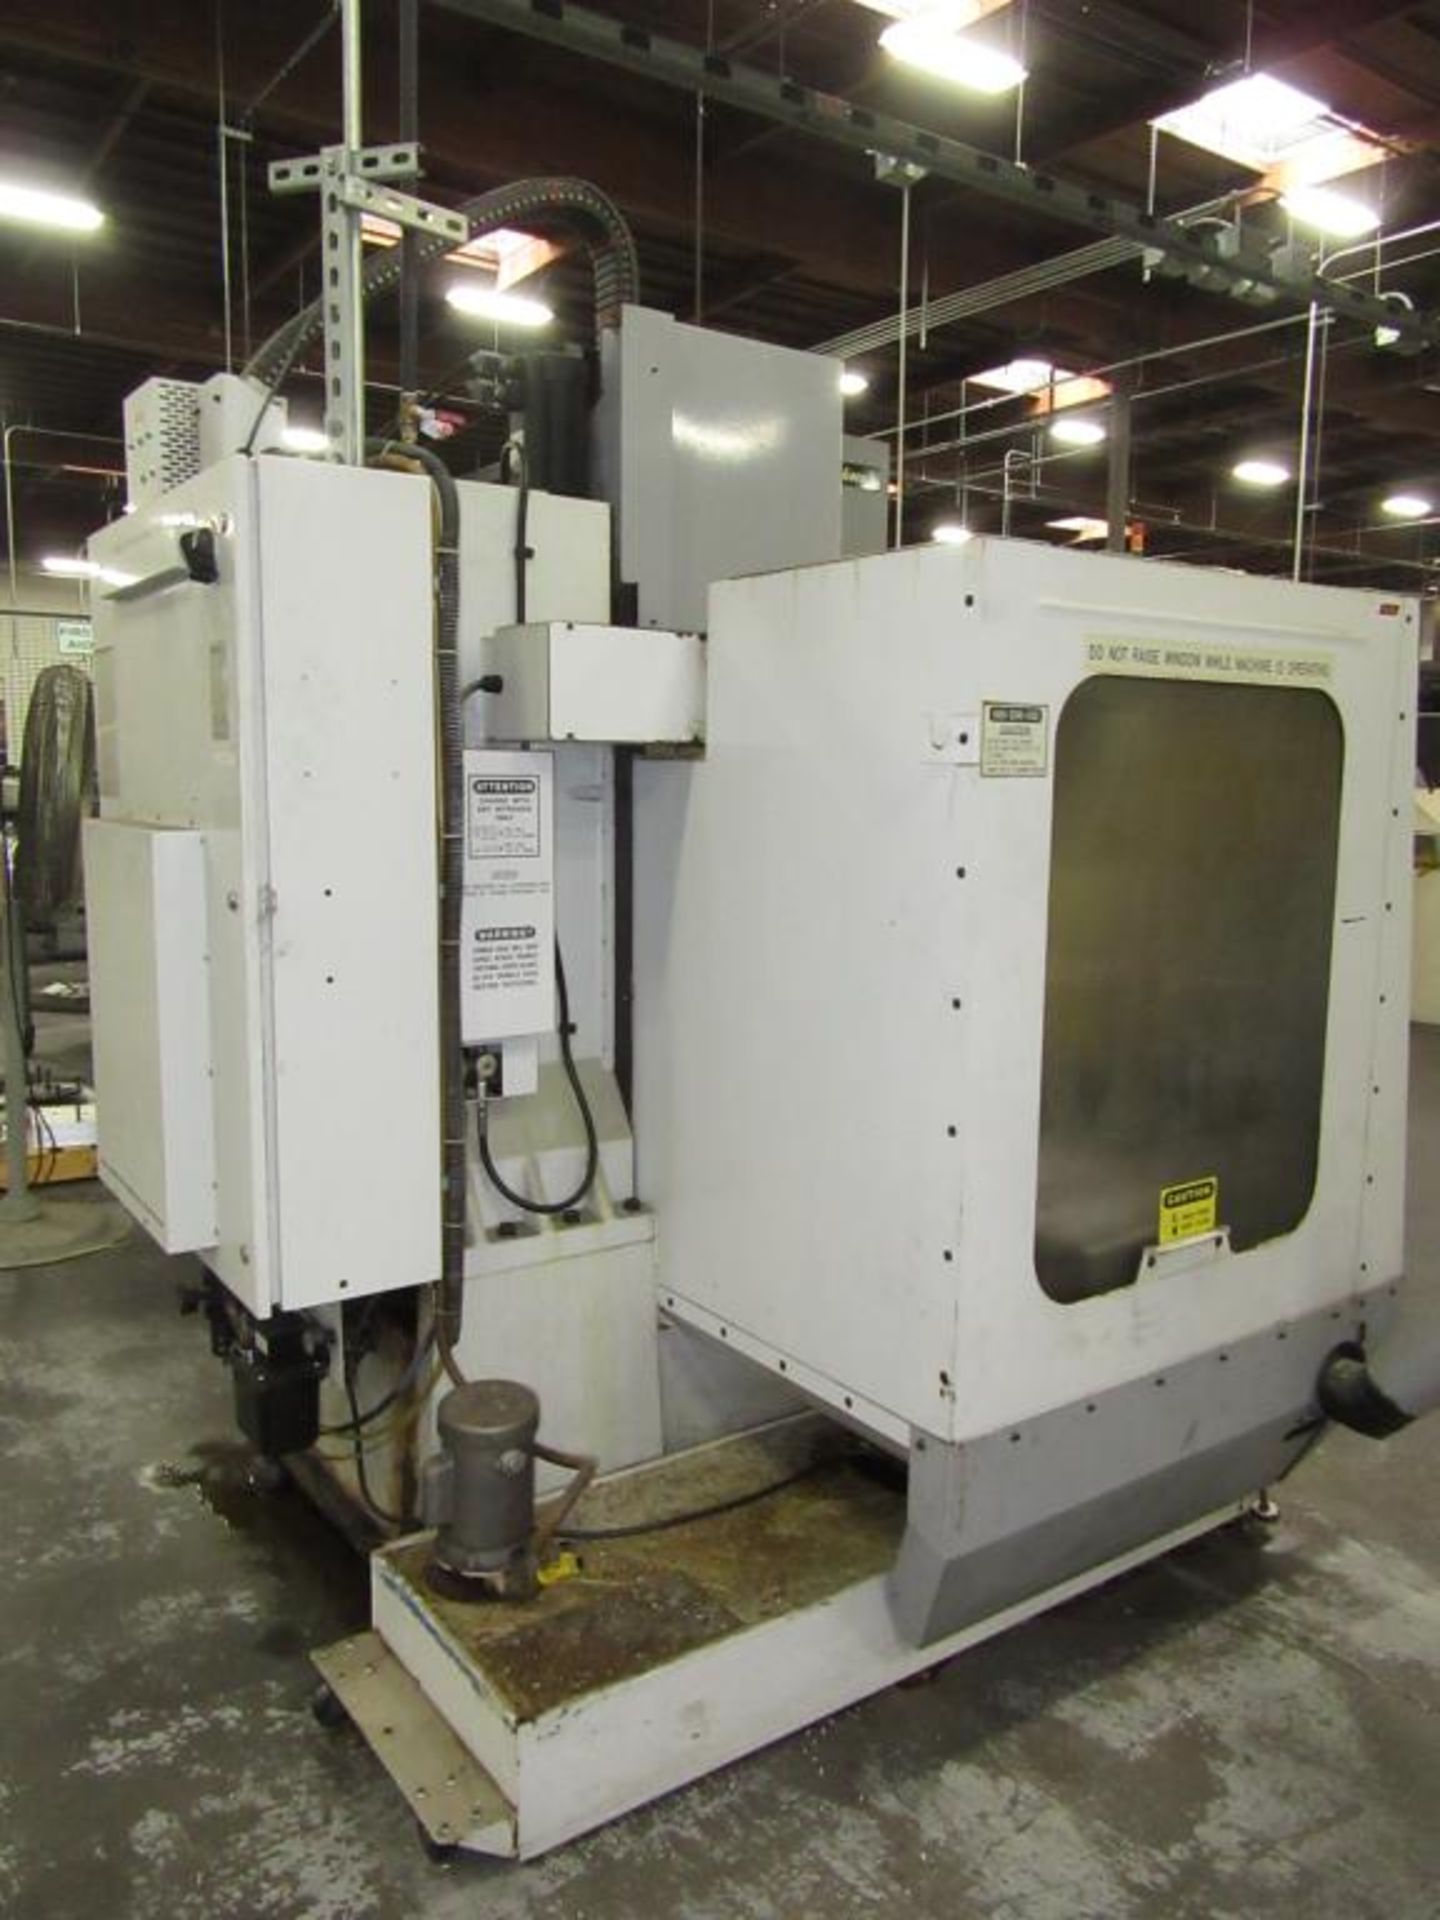 Haas VF-OE. 1997 - CNC Vertical Machining Center with Haas 3-Axis Control Panel, Table Size 36"L x - Image 11 of 12